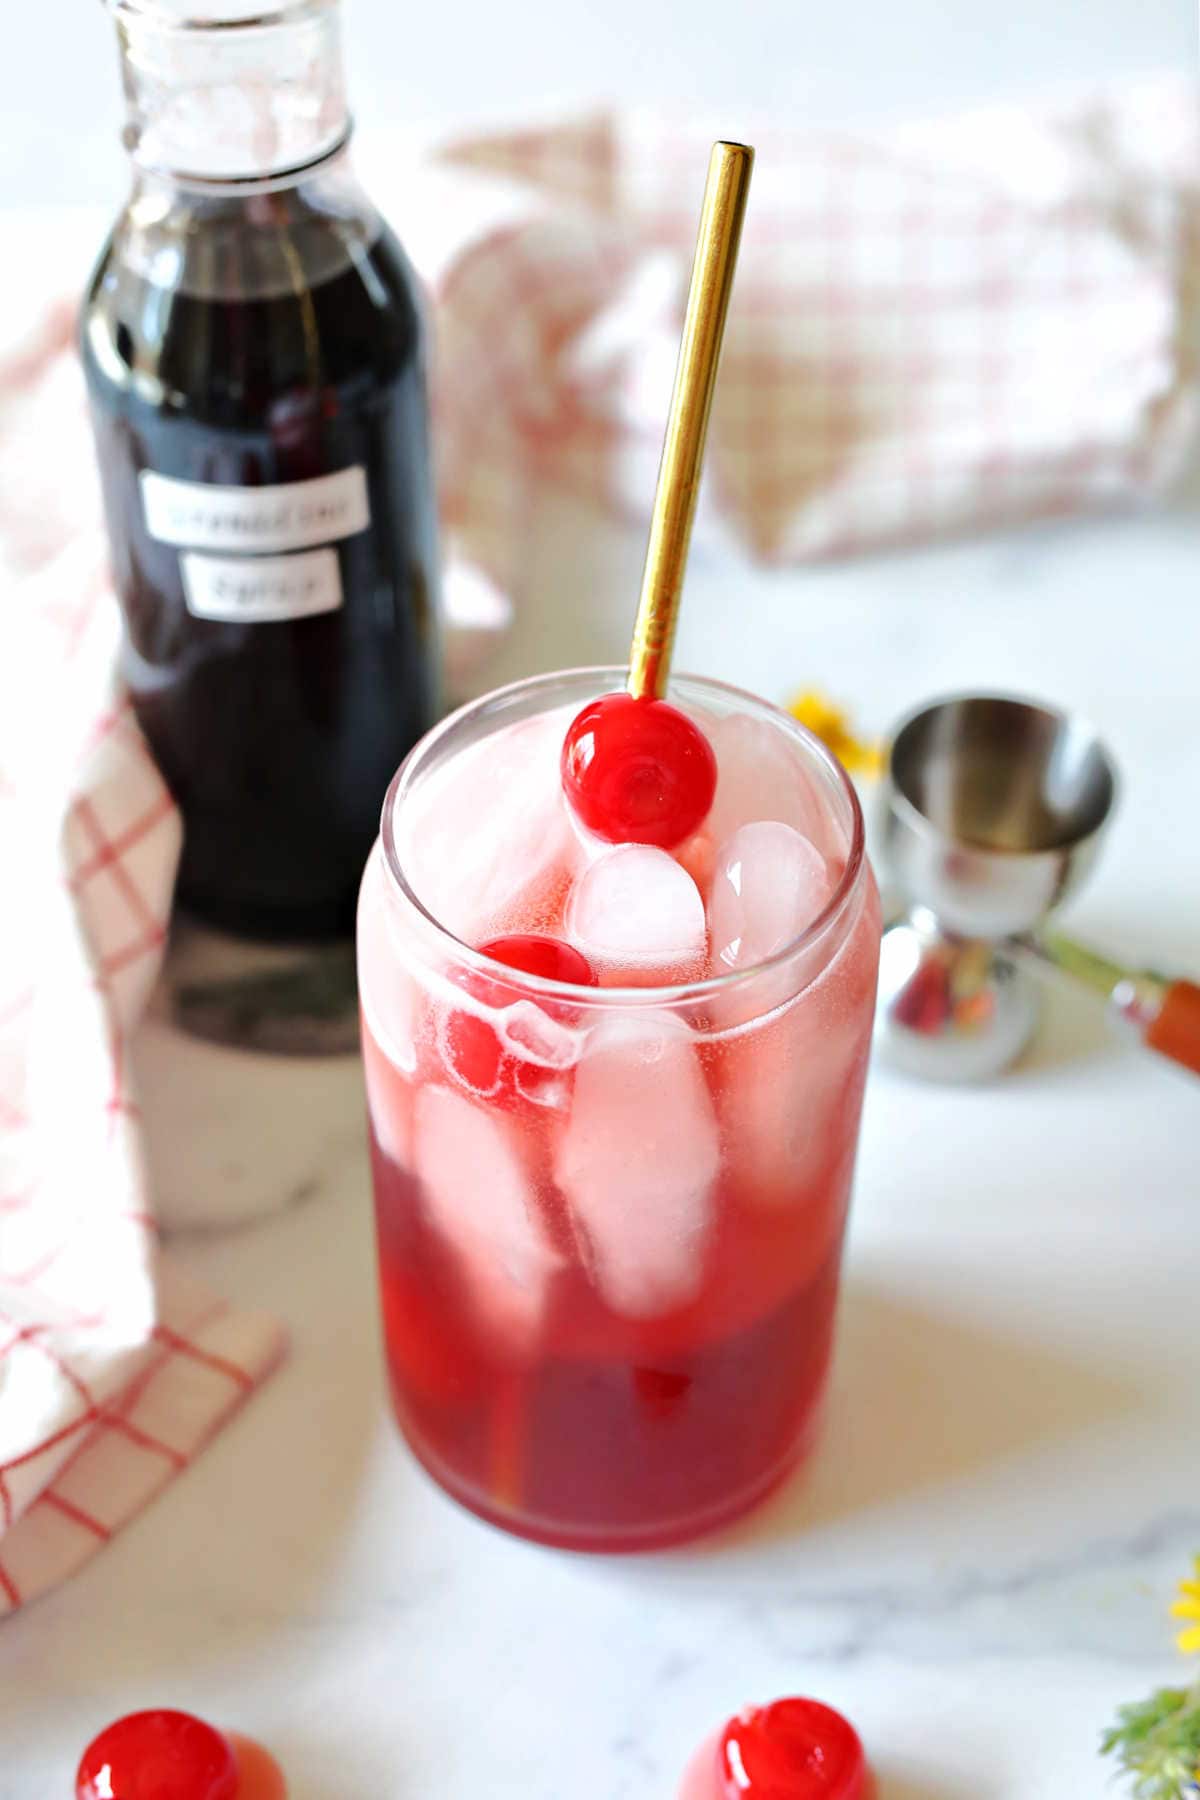 shirley temple drink with a cherry and straw